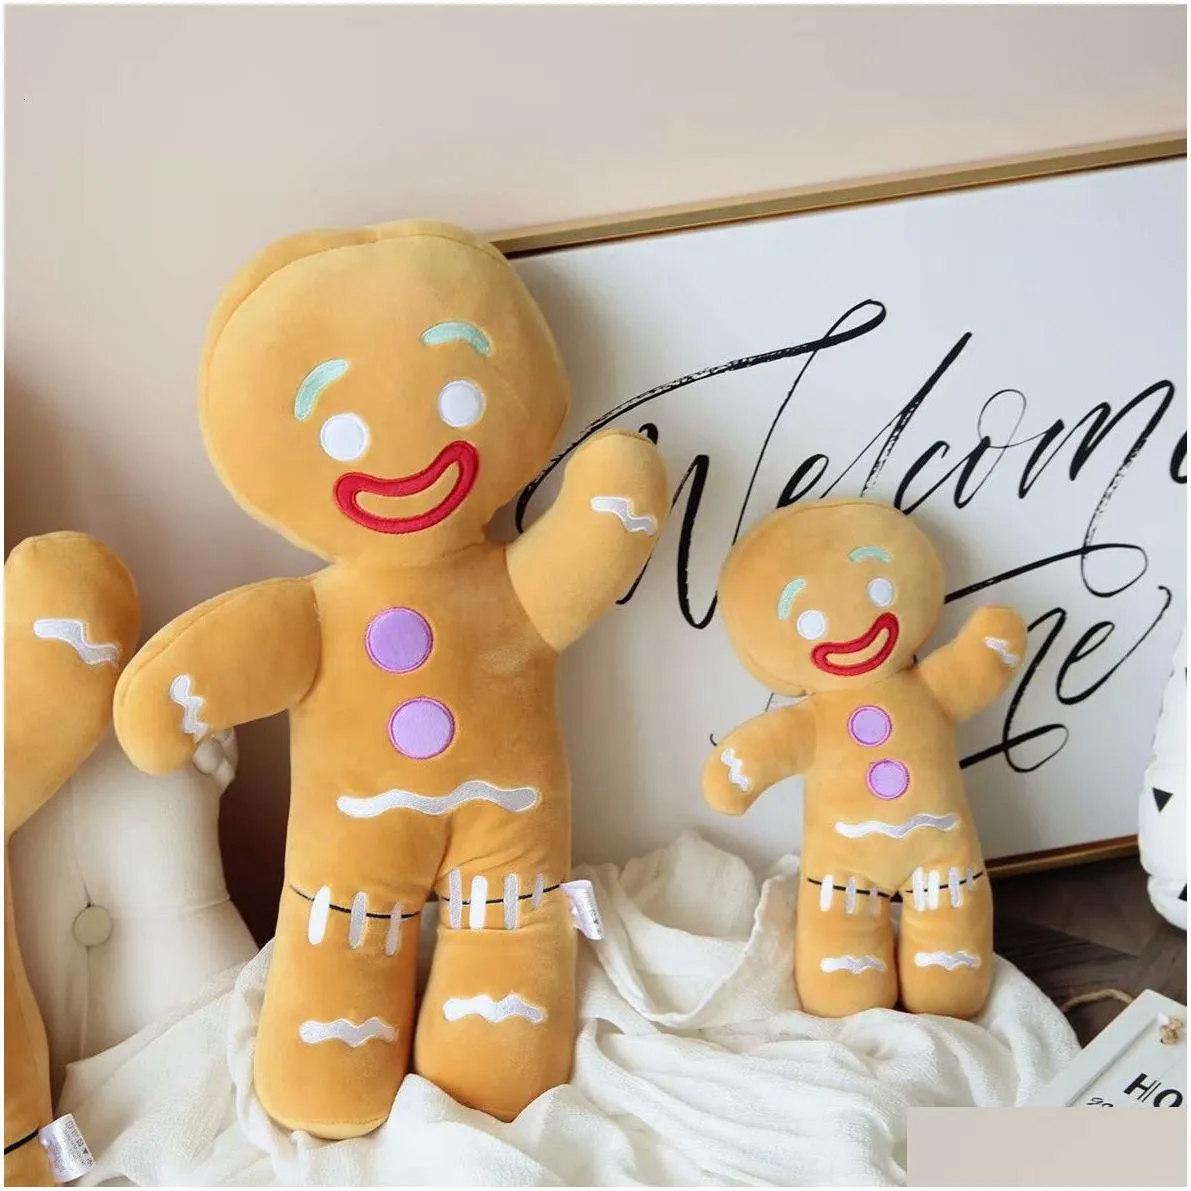 Dolls 3060cm Cartoon Cute Gingerbread Plush Toys Pendant Stuffed Baby Appease Doll Biscuits Man Pillow Reindeer for Kids Gift 221206